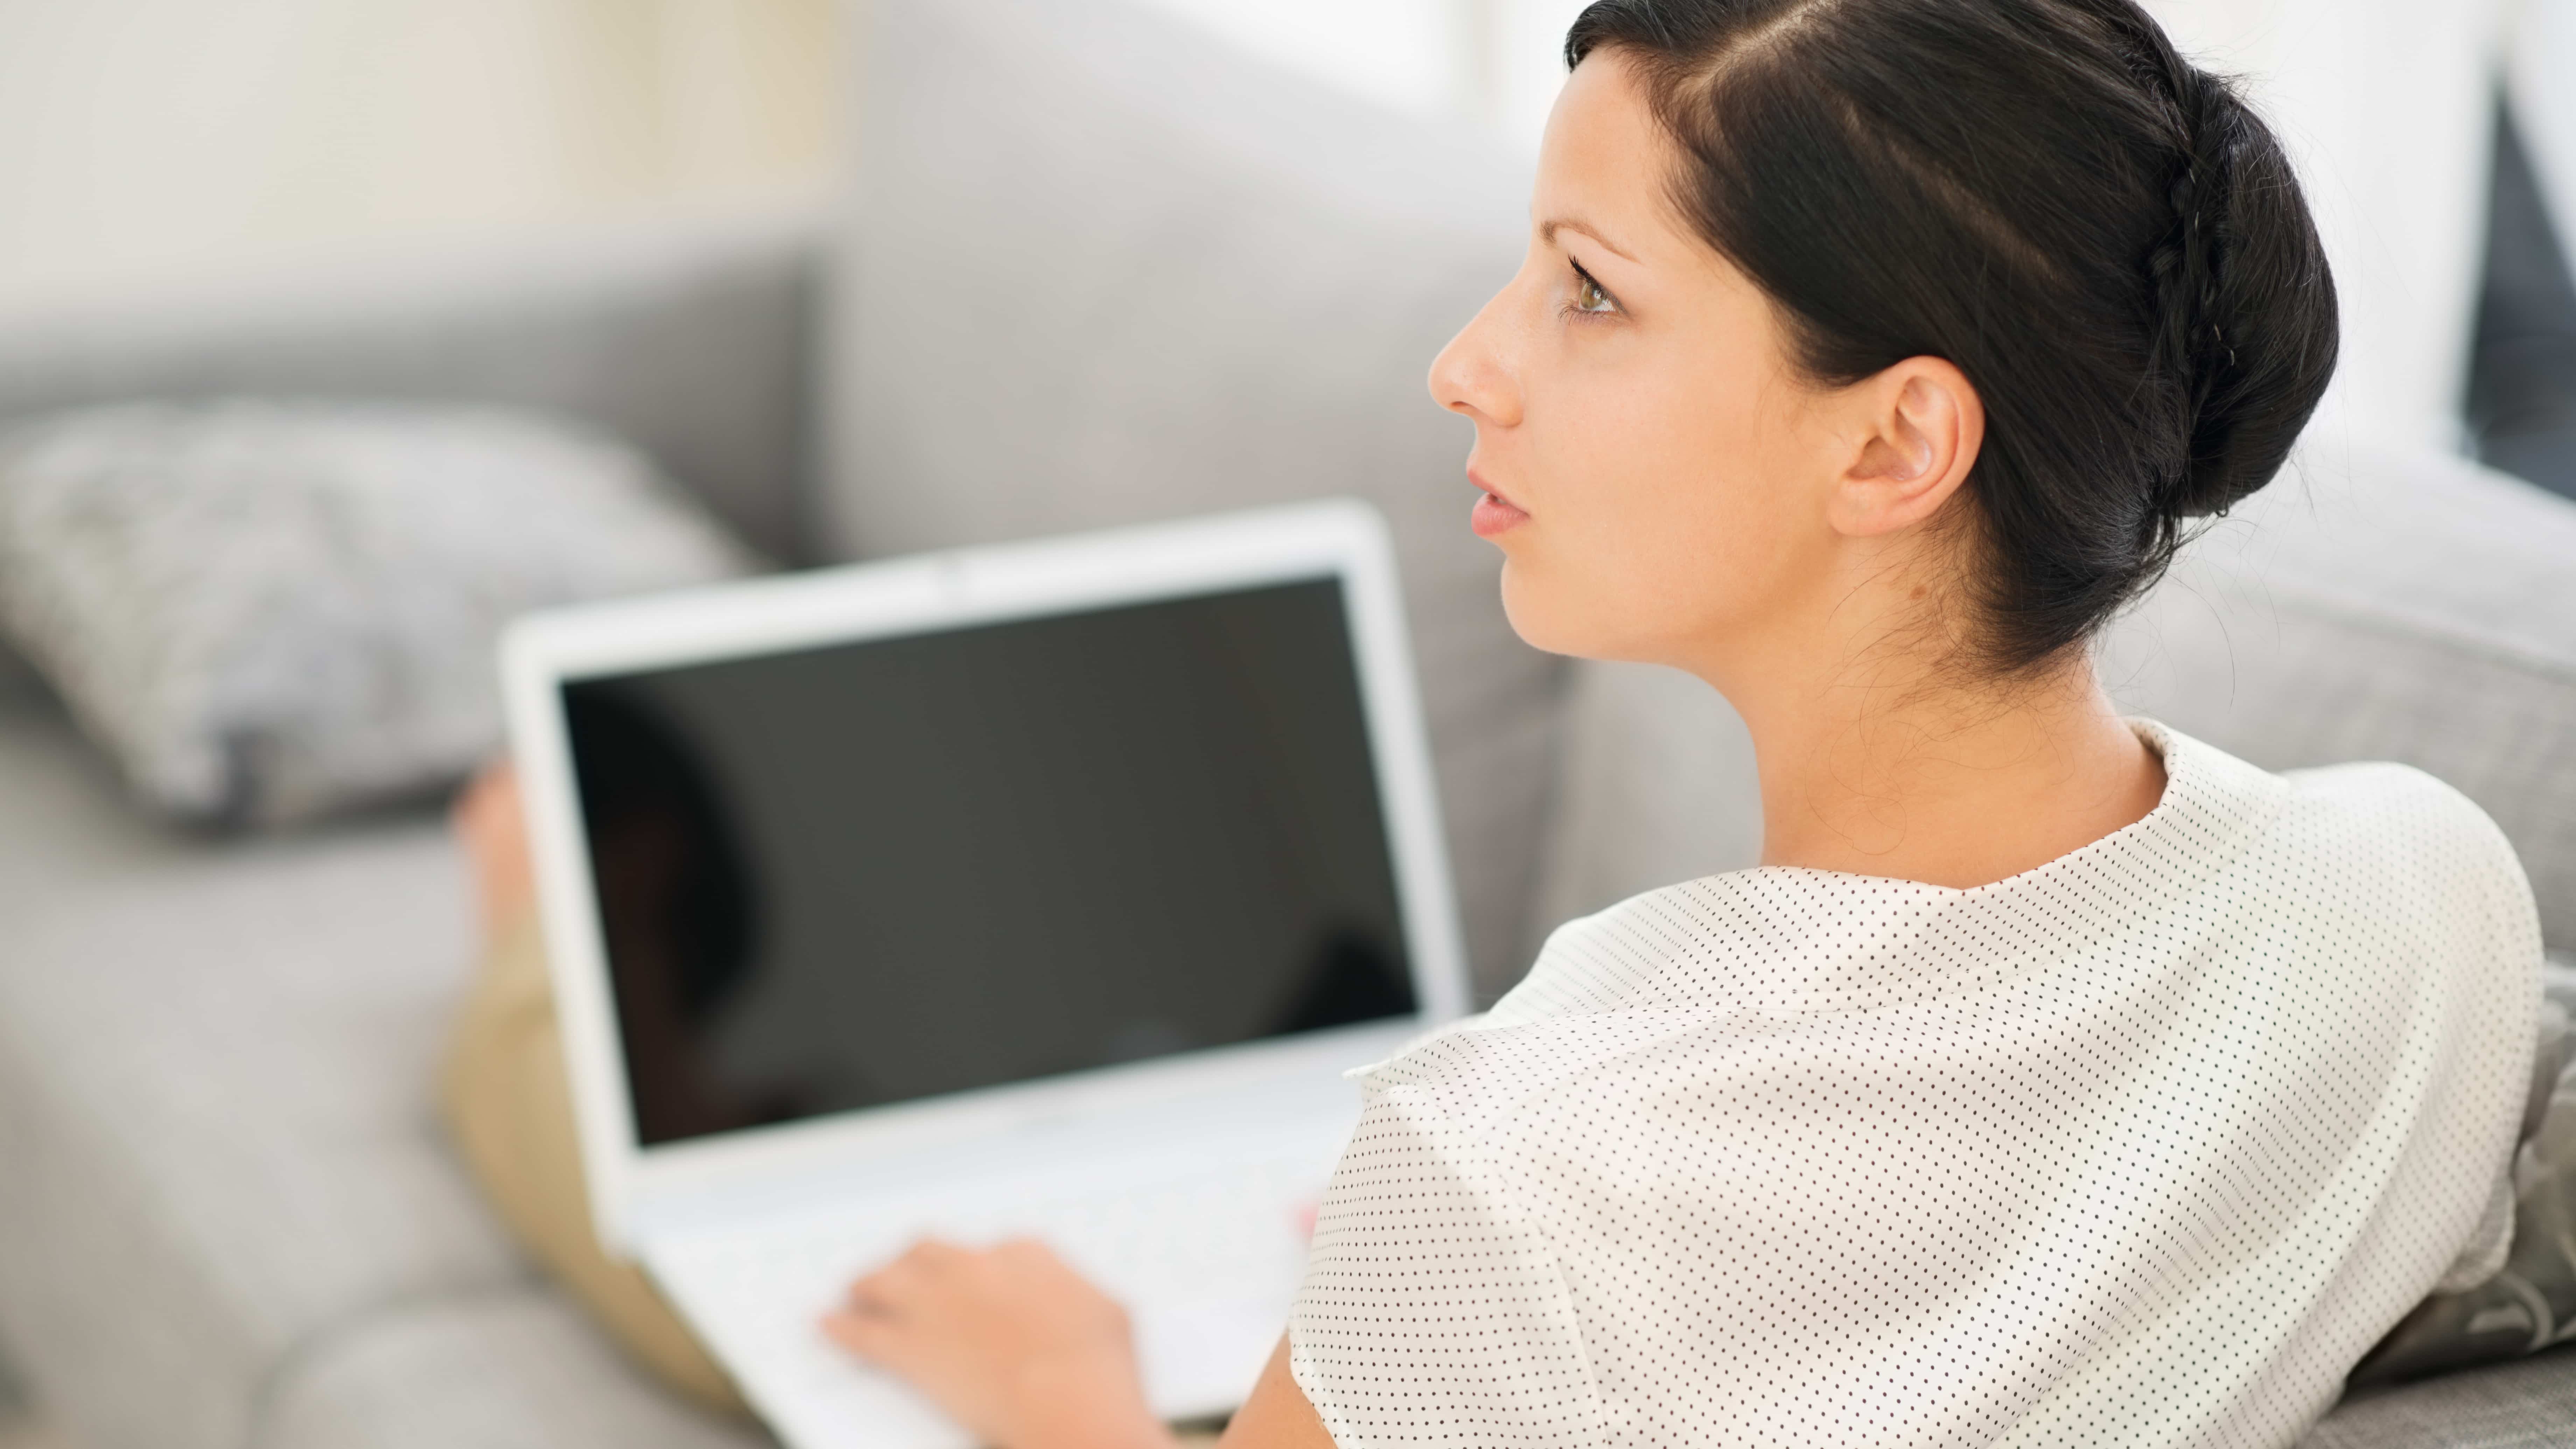 A women thinking while on the computer